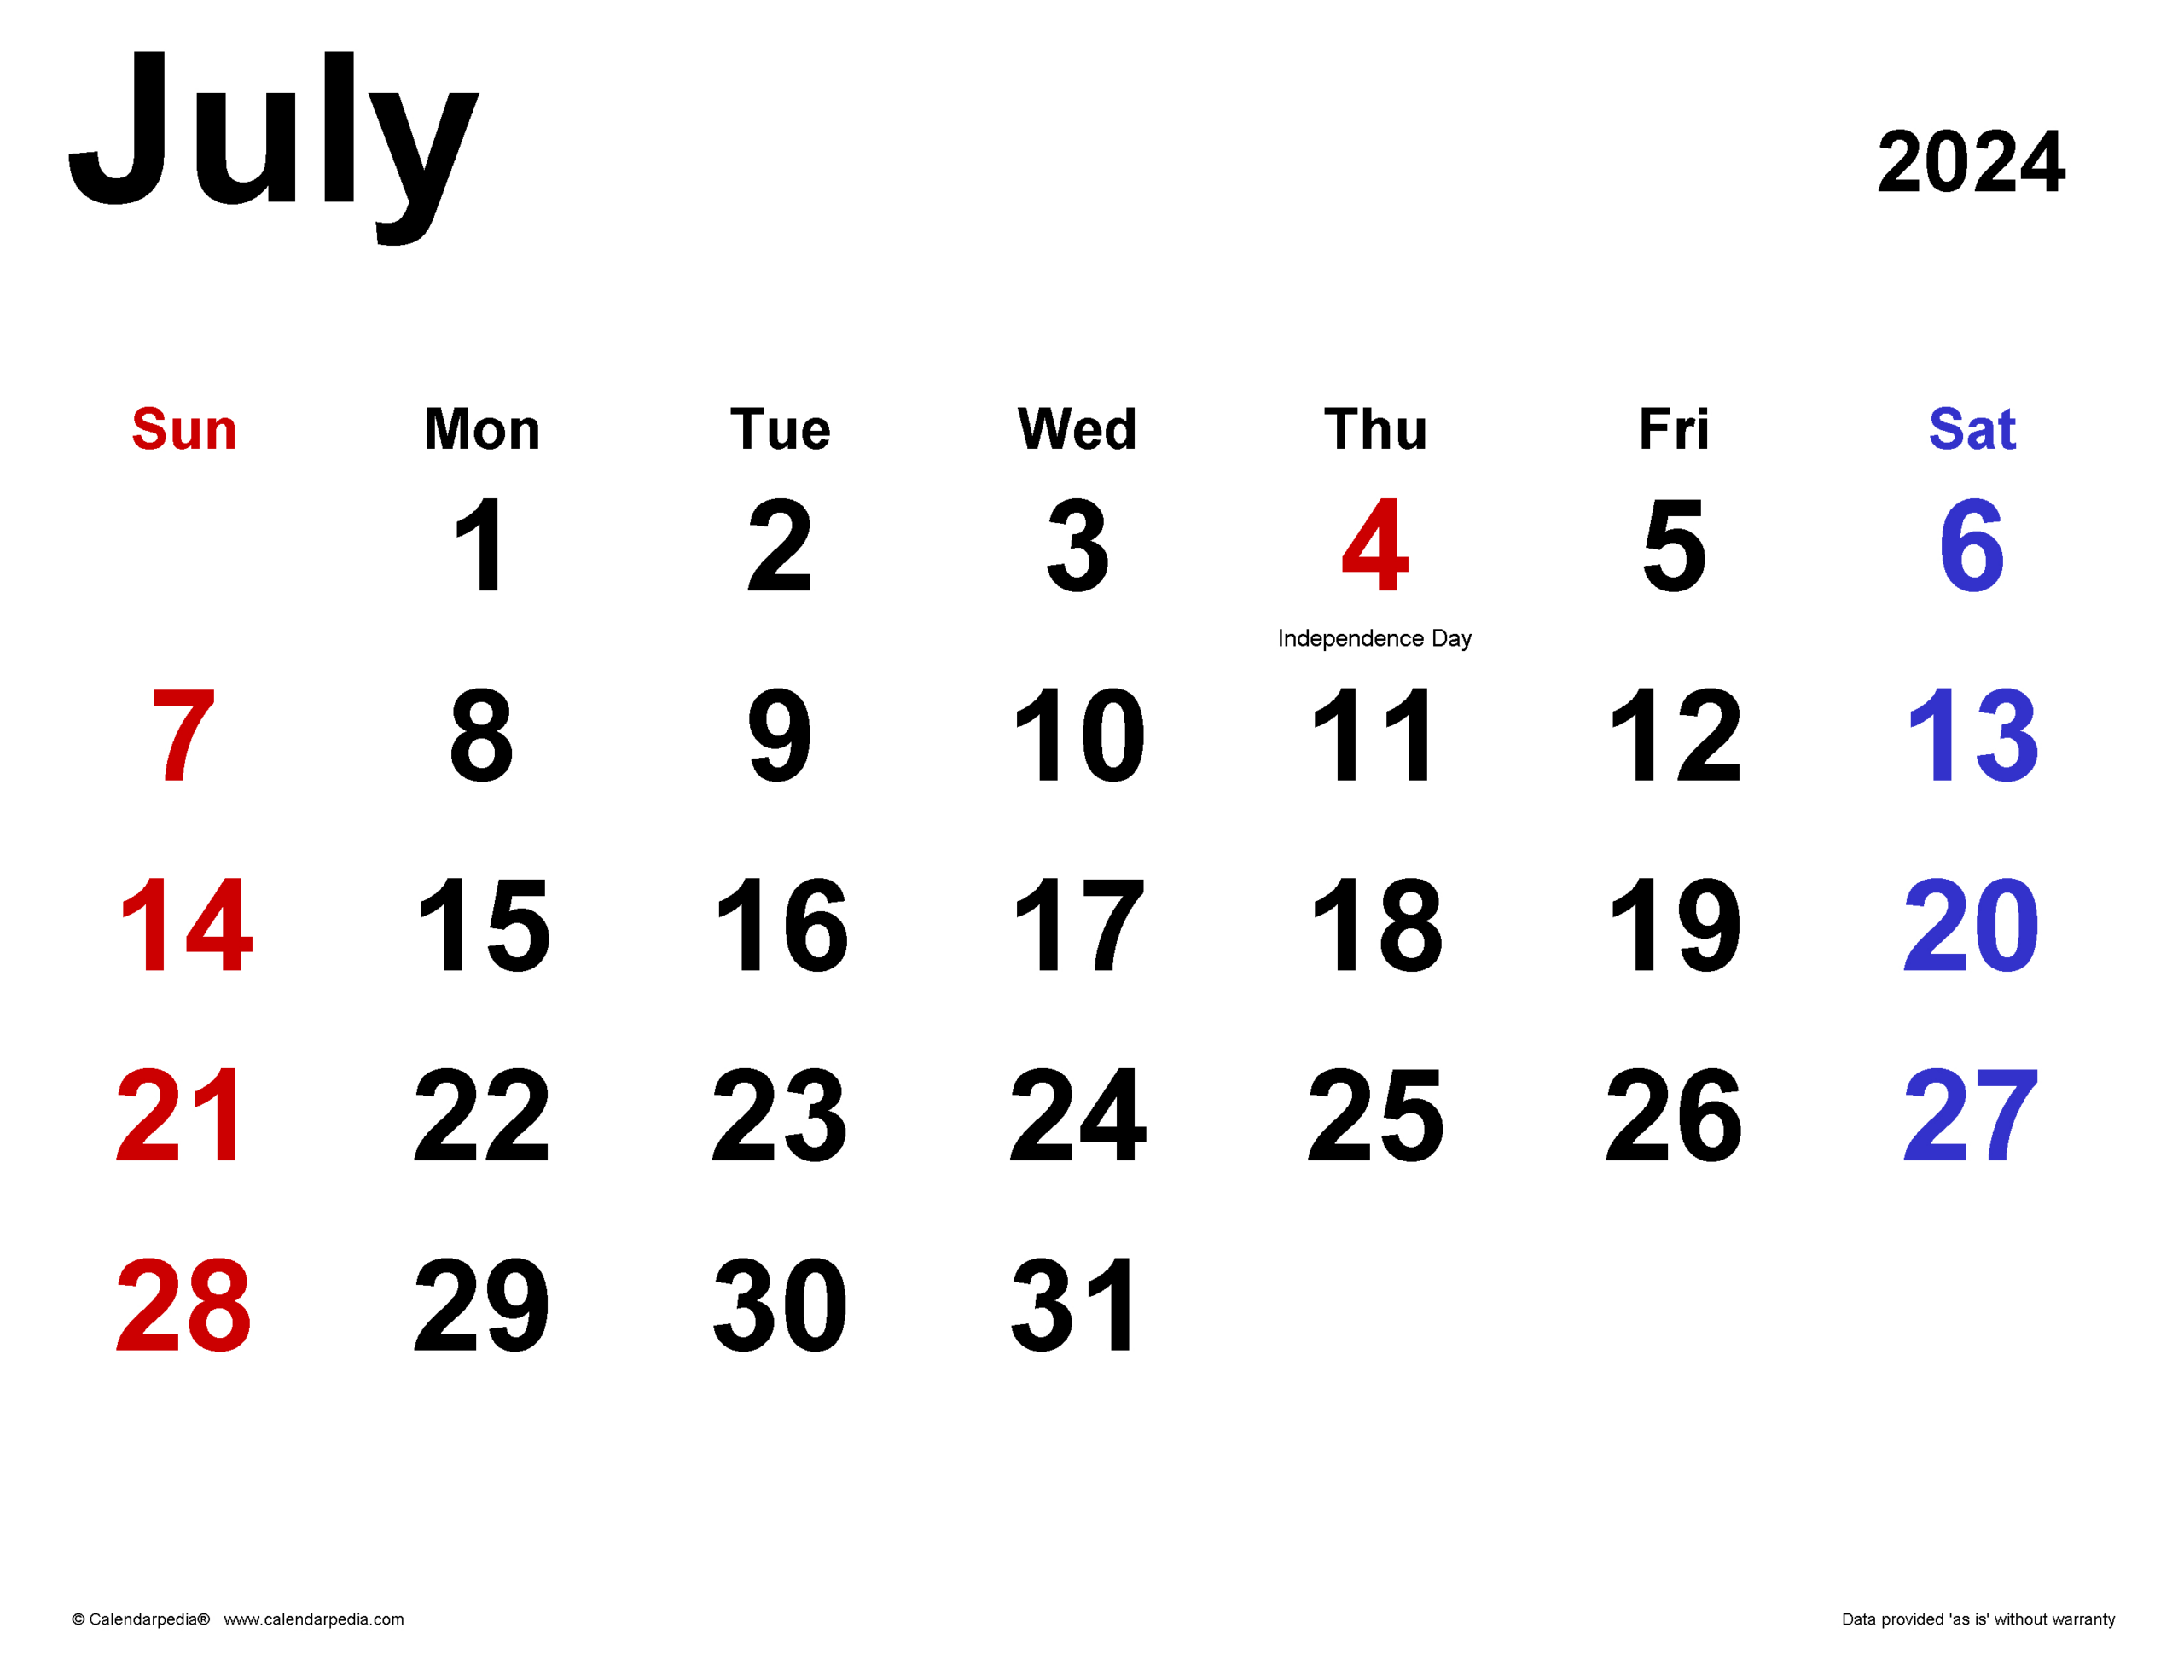 July 2024 Calendar | Templates For Word, Excel And Pdf for Date Calendar July 2024